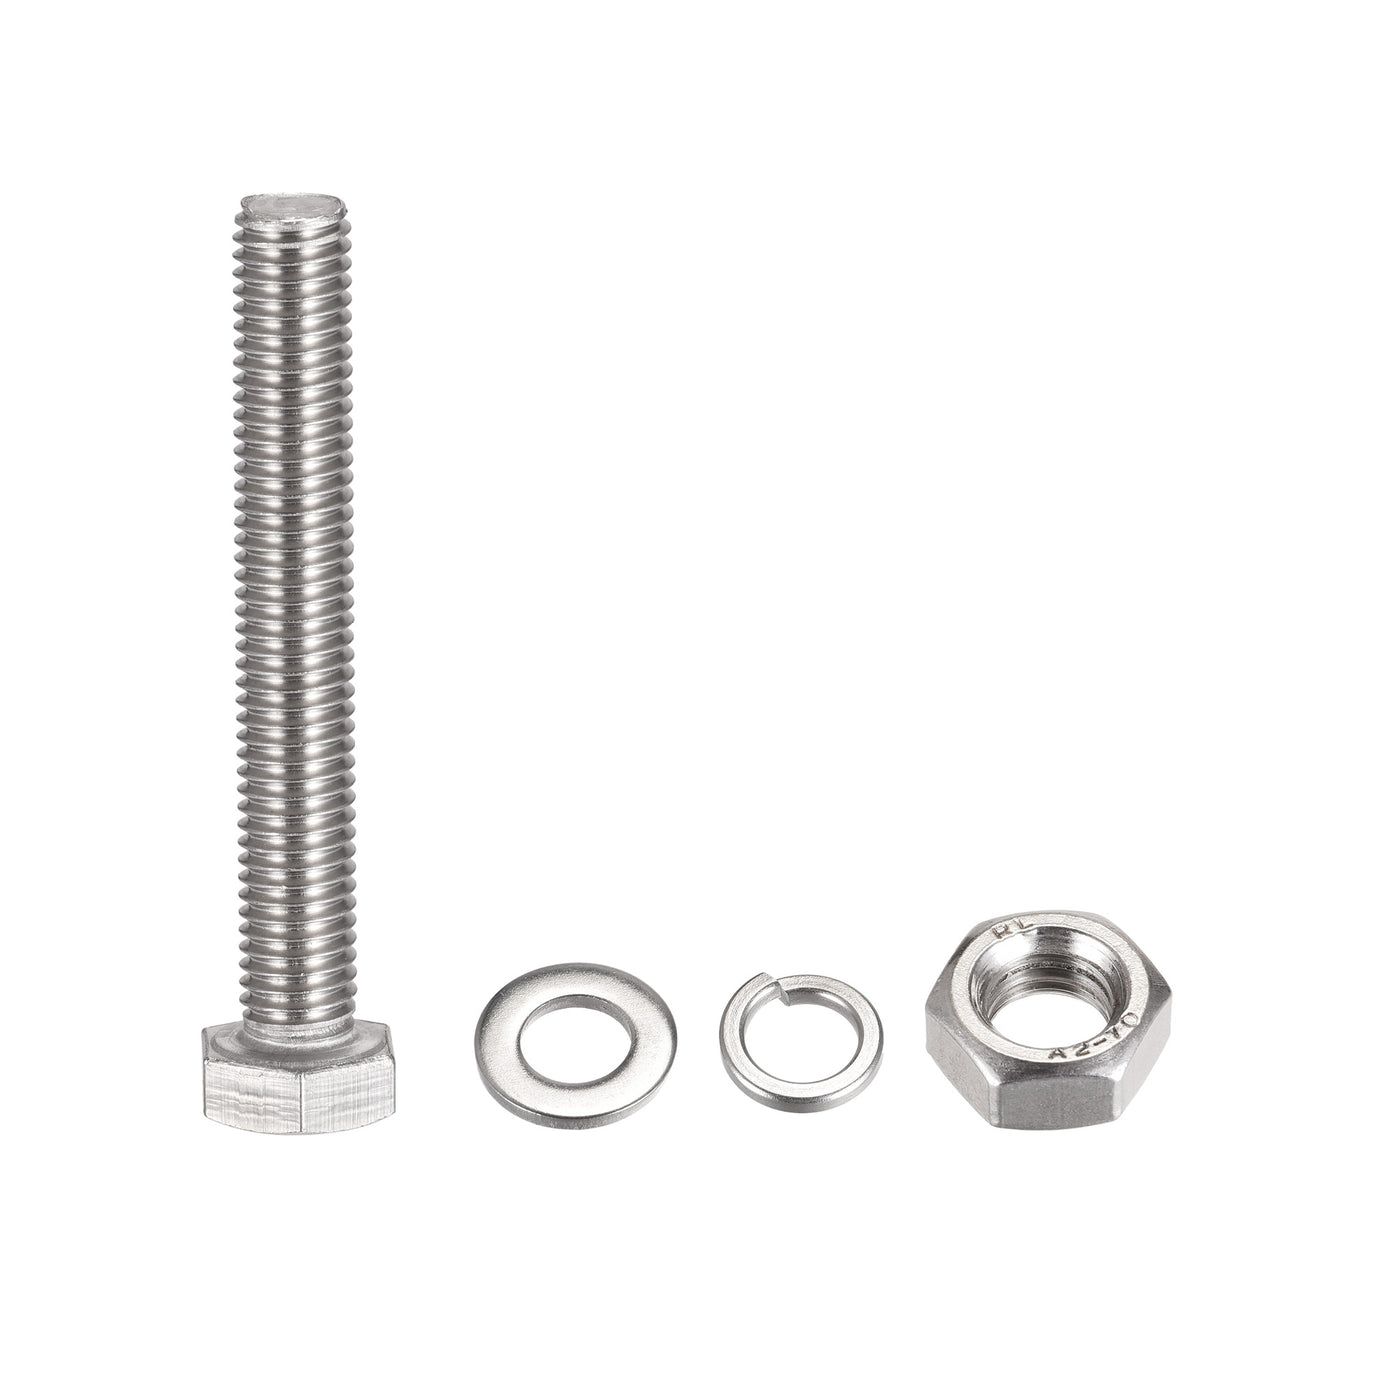 uxcell Uxcell Hex Head Screw Bolts, Nuts, Flat & Lock Washers Kits, 304 Stainless Steel Fully Thread Hexagon Bolts 6 Set